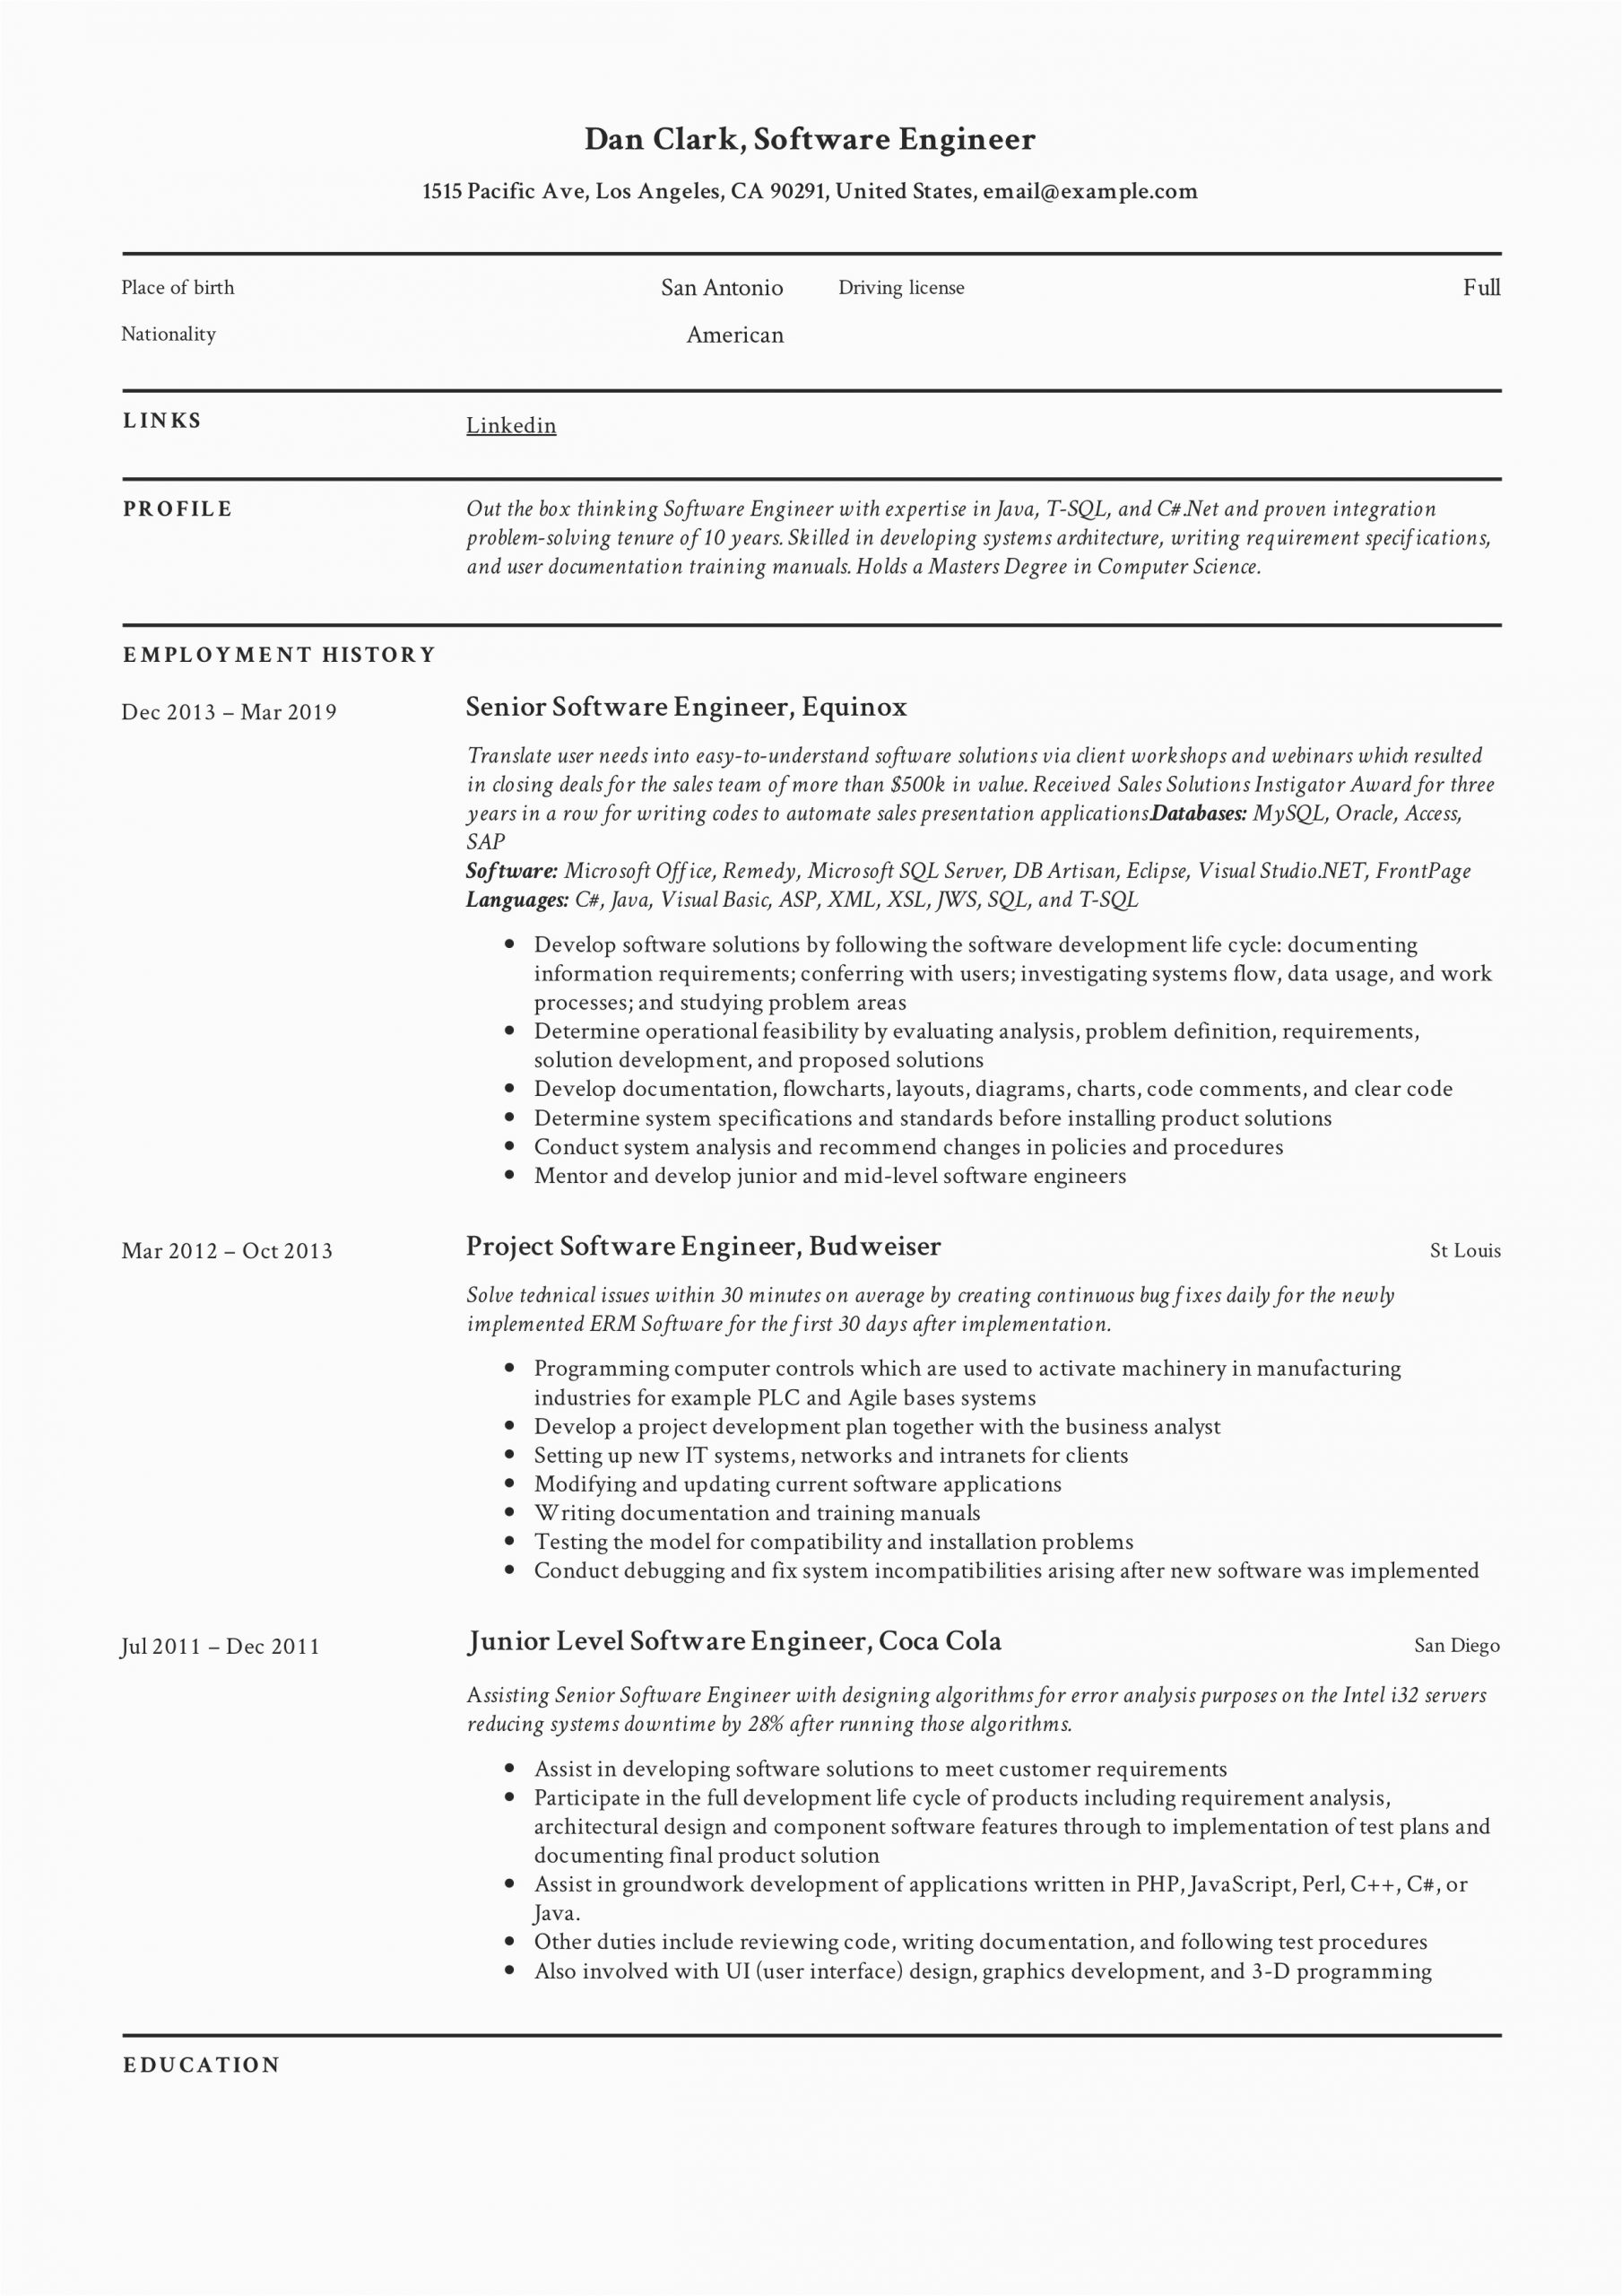 Sample Resume for Experienced software Engineer Pdf software Engineer Resume Writing Guide